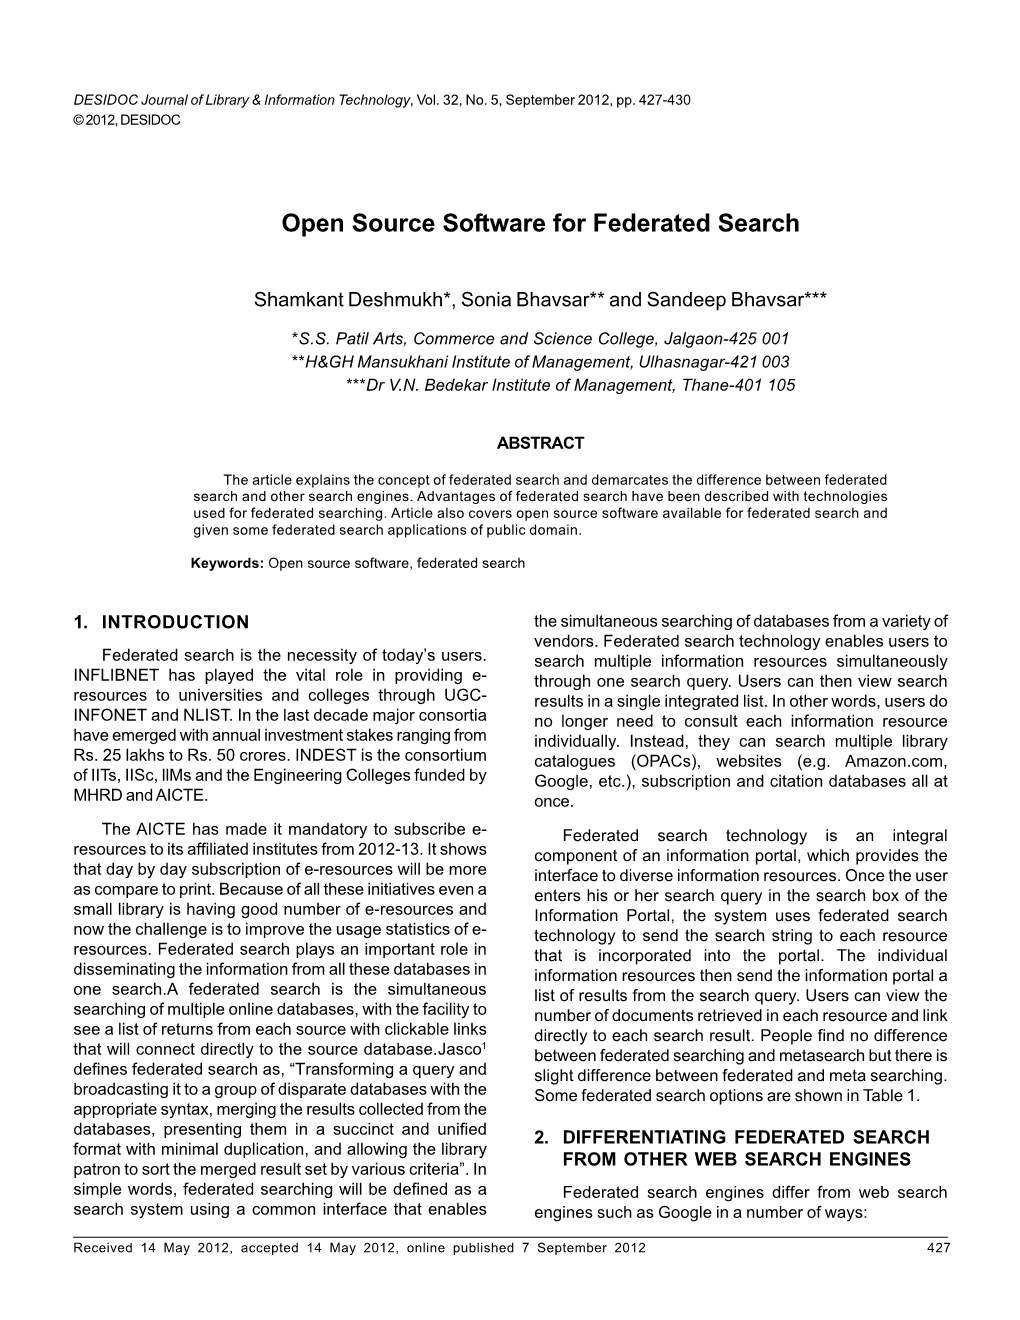 Open Source Software for Federated Search